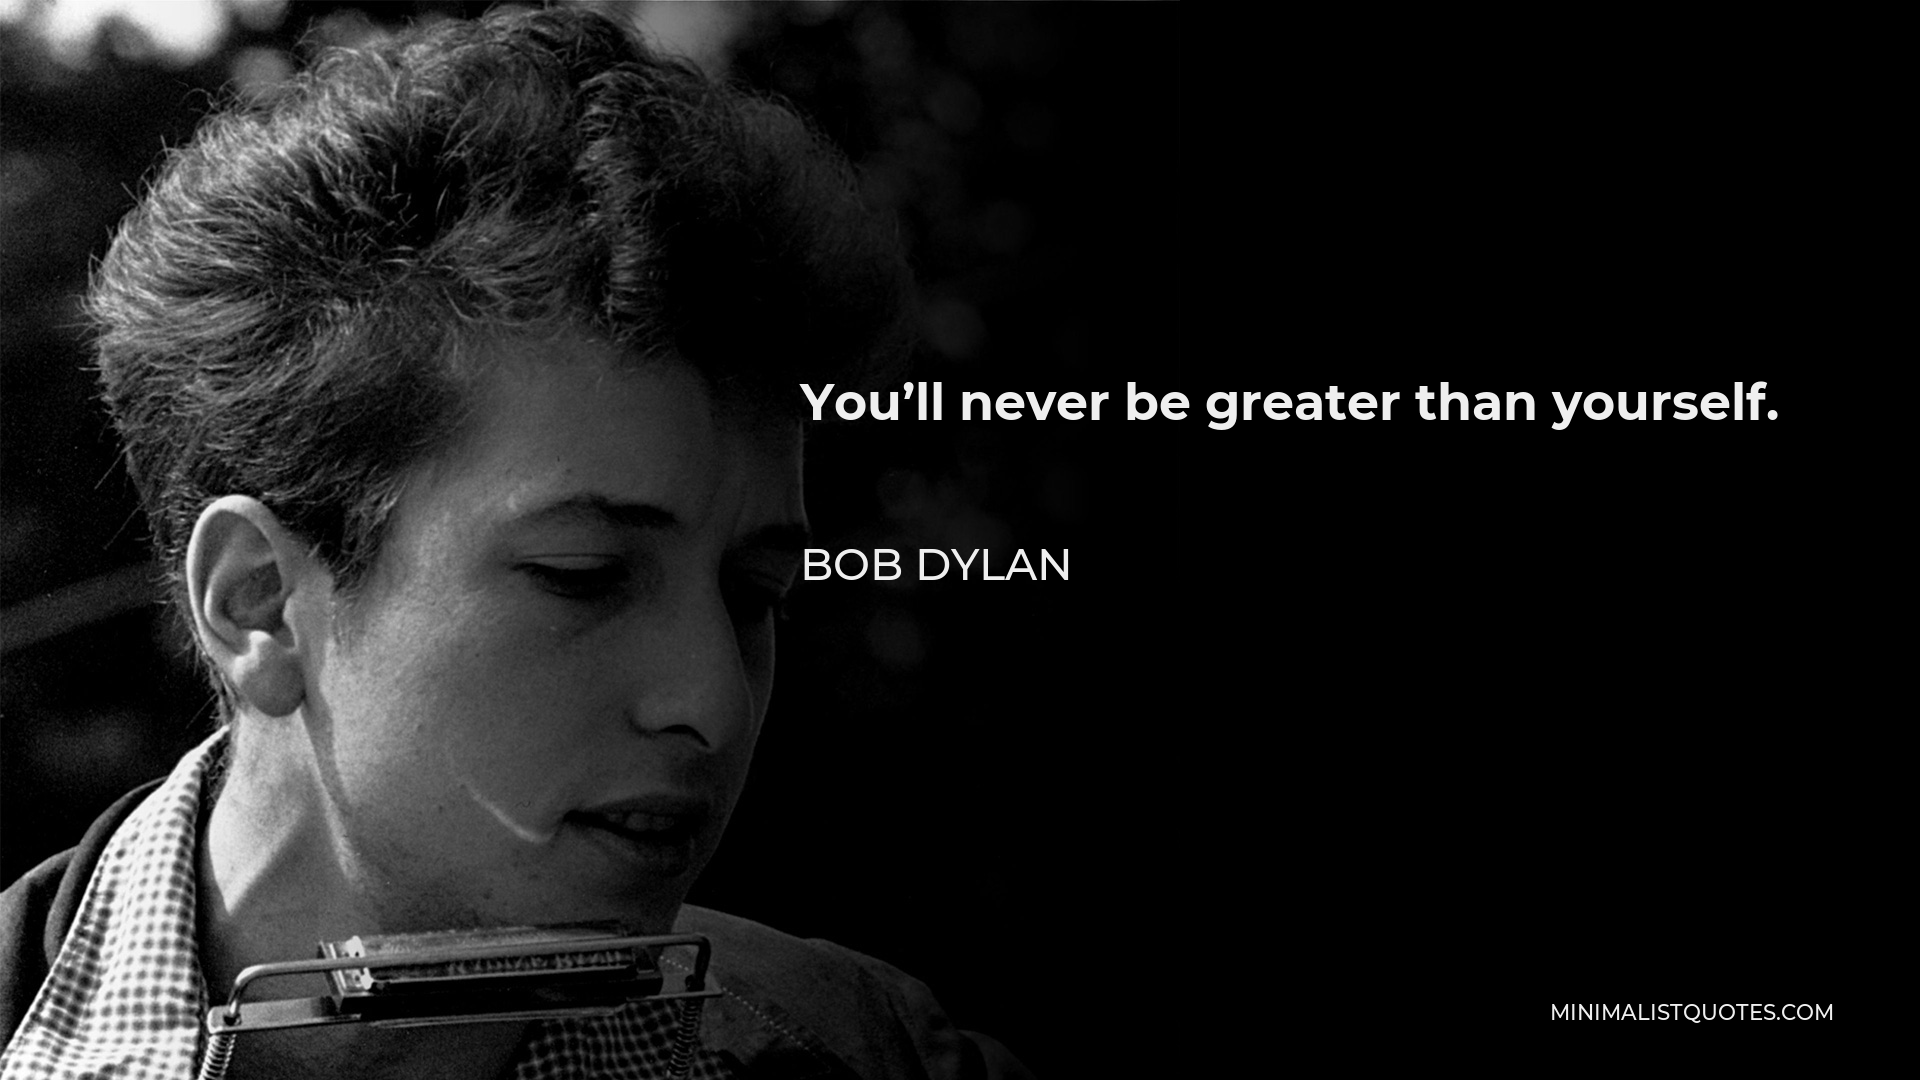 Bob Dylan Quote - You’ll never be greater than yourself.